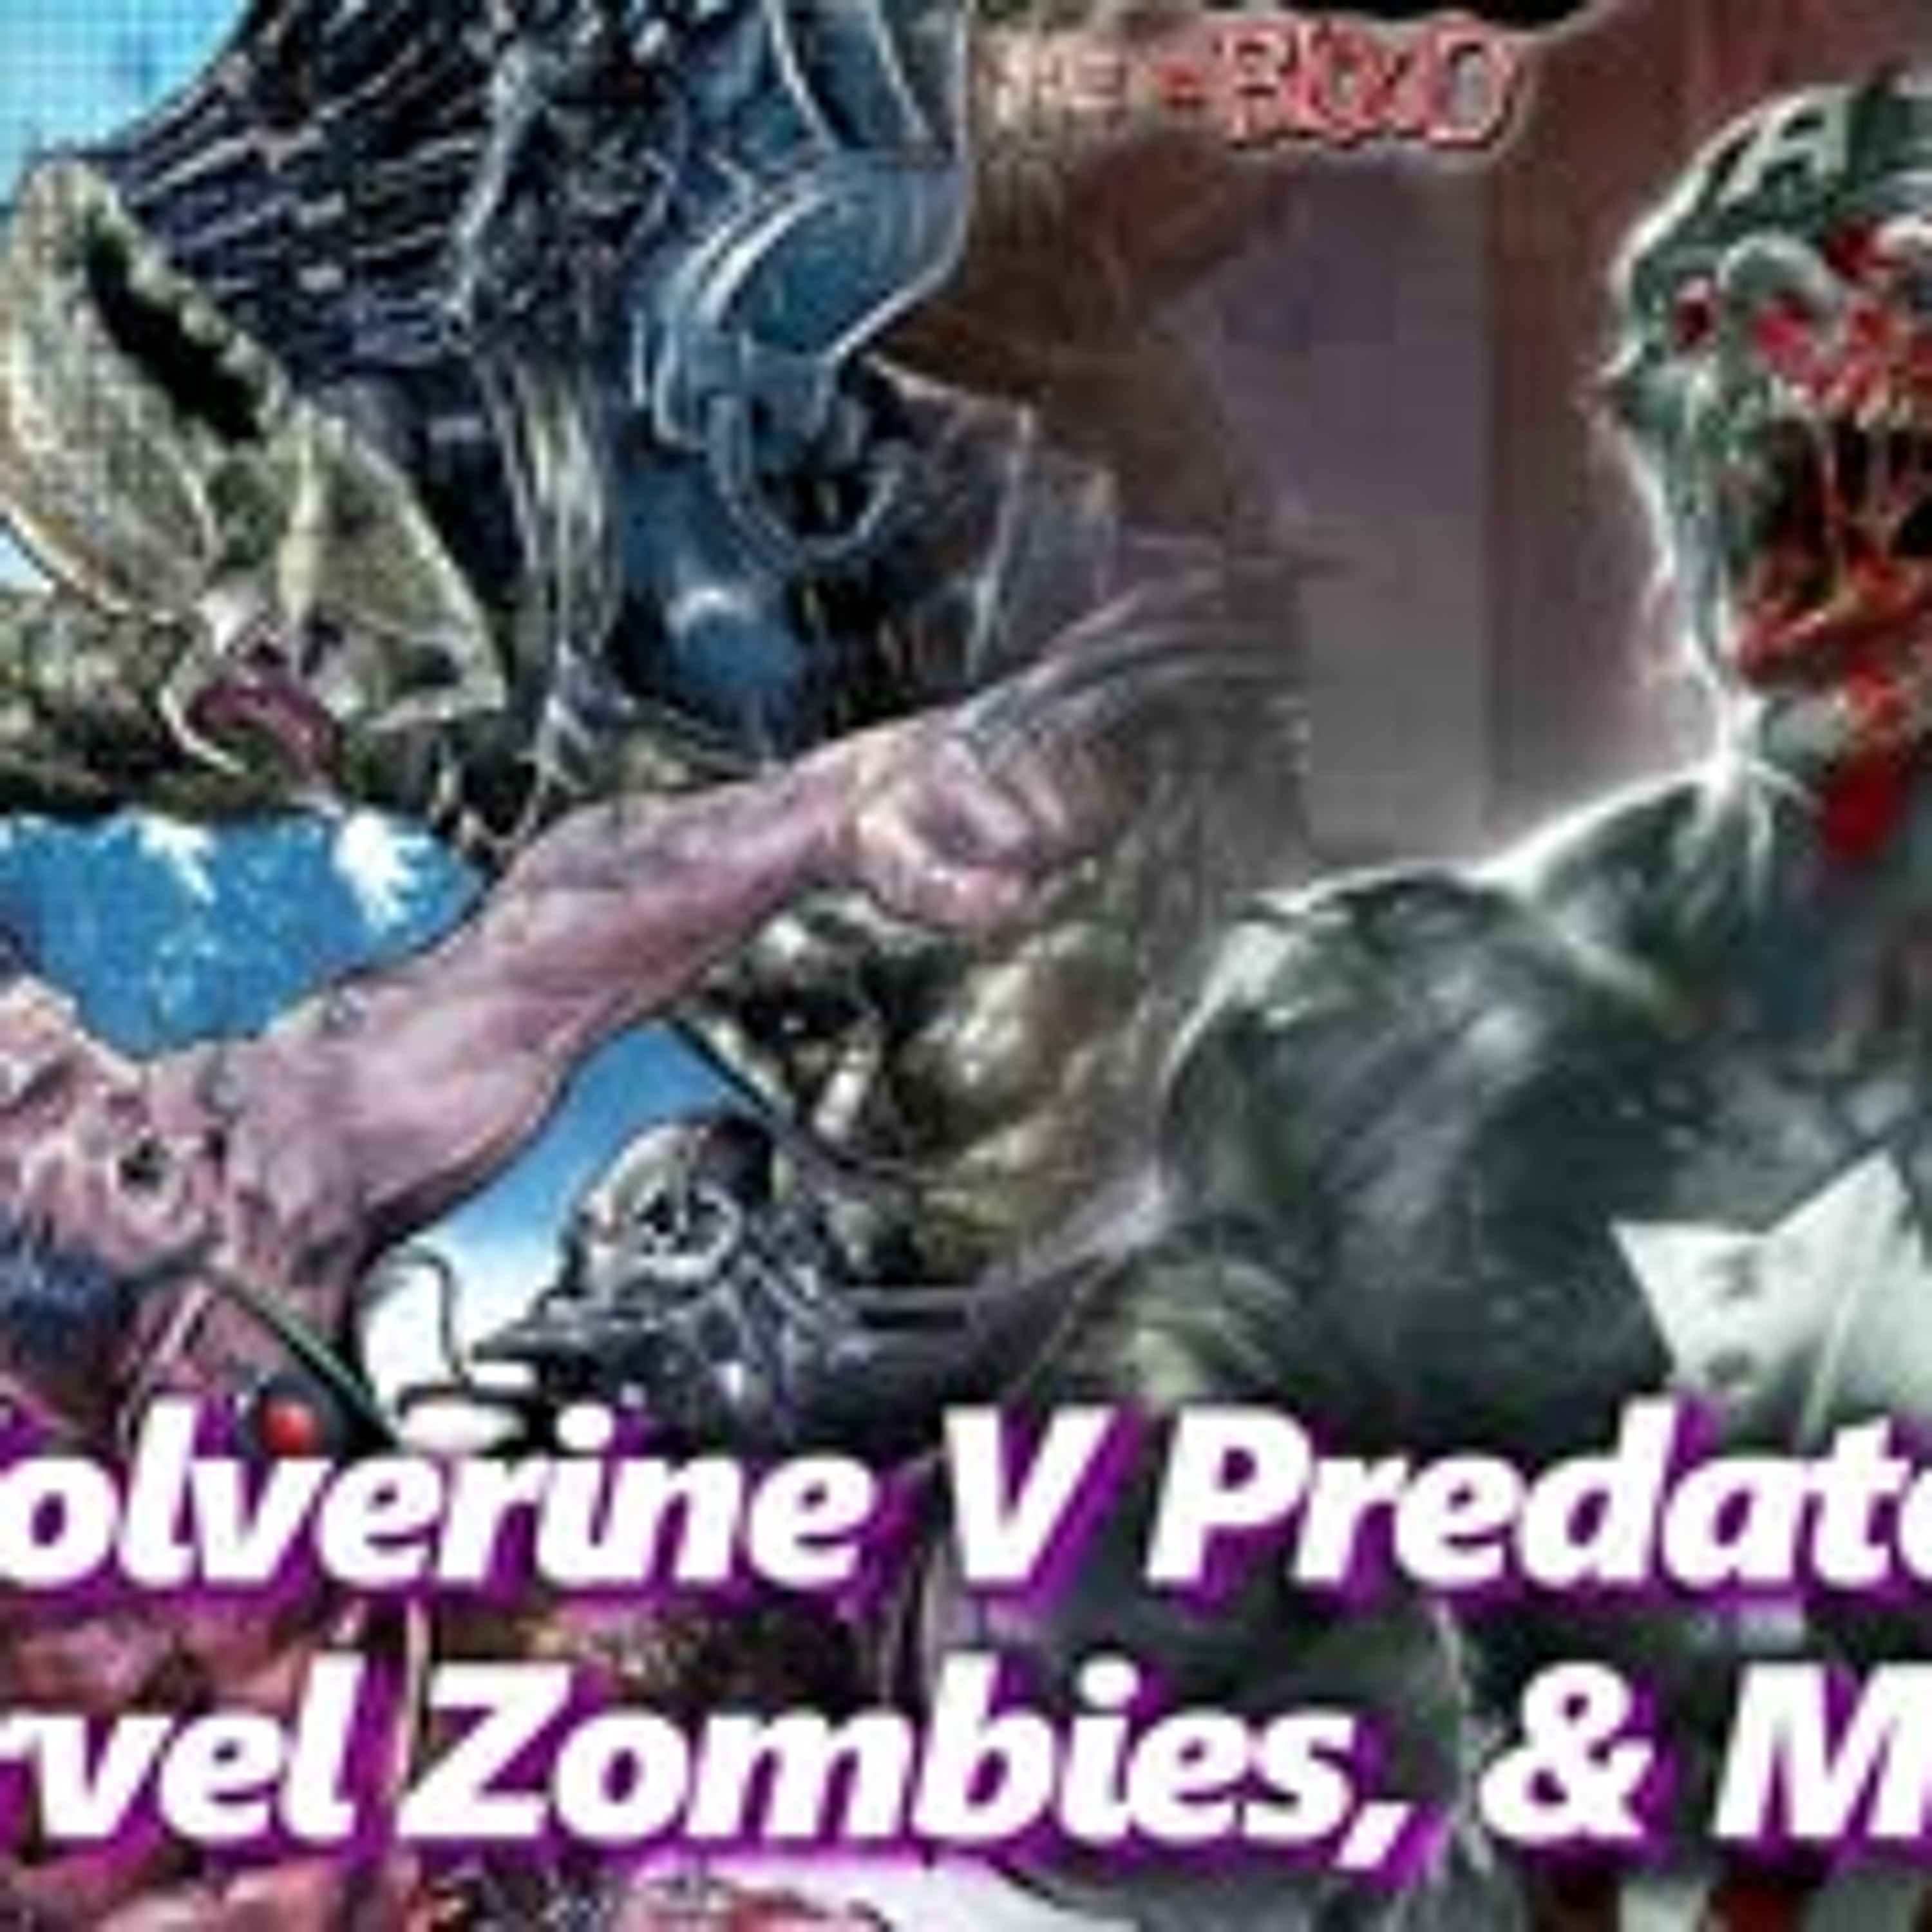 Wolverine vs Predator, Marvel Zombies, & More - Absolute Comics | Absolutely Marvel & DC